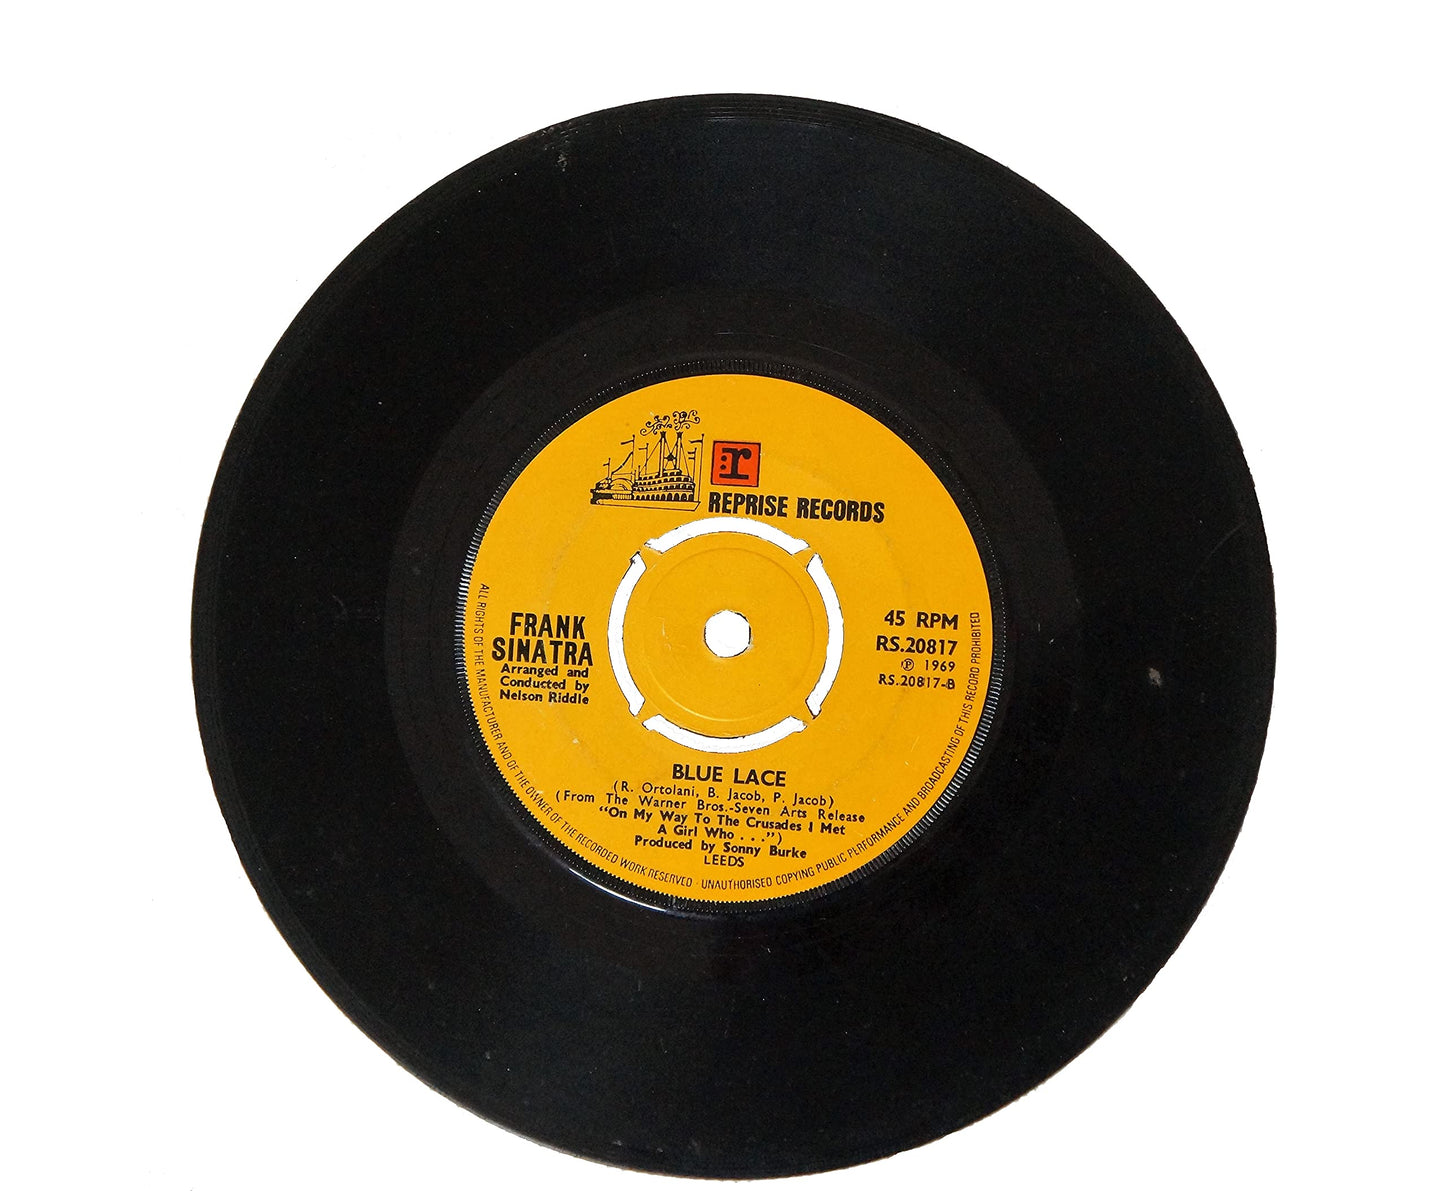 Vintage Frank Sinatra A.Side My Way, B.Side Blue Lace Reprise Records Label 1969, 7 inch Vinyl Single Record